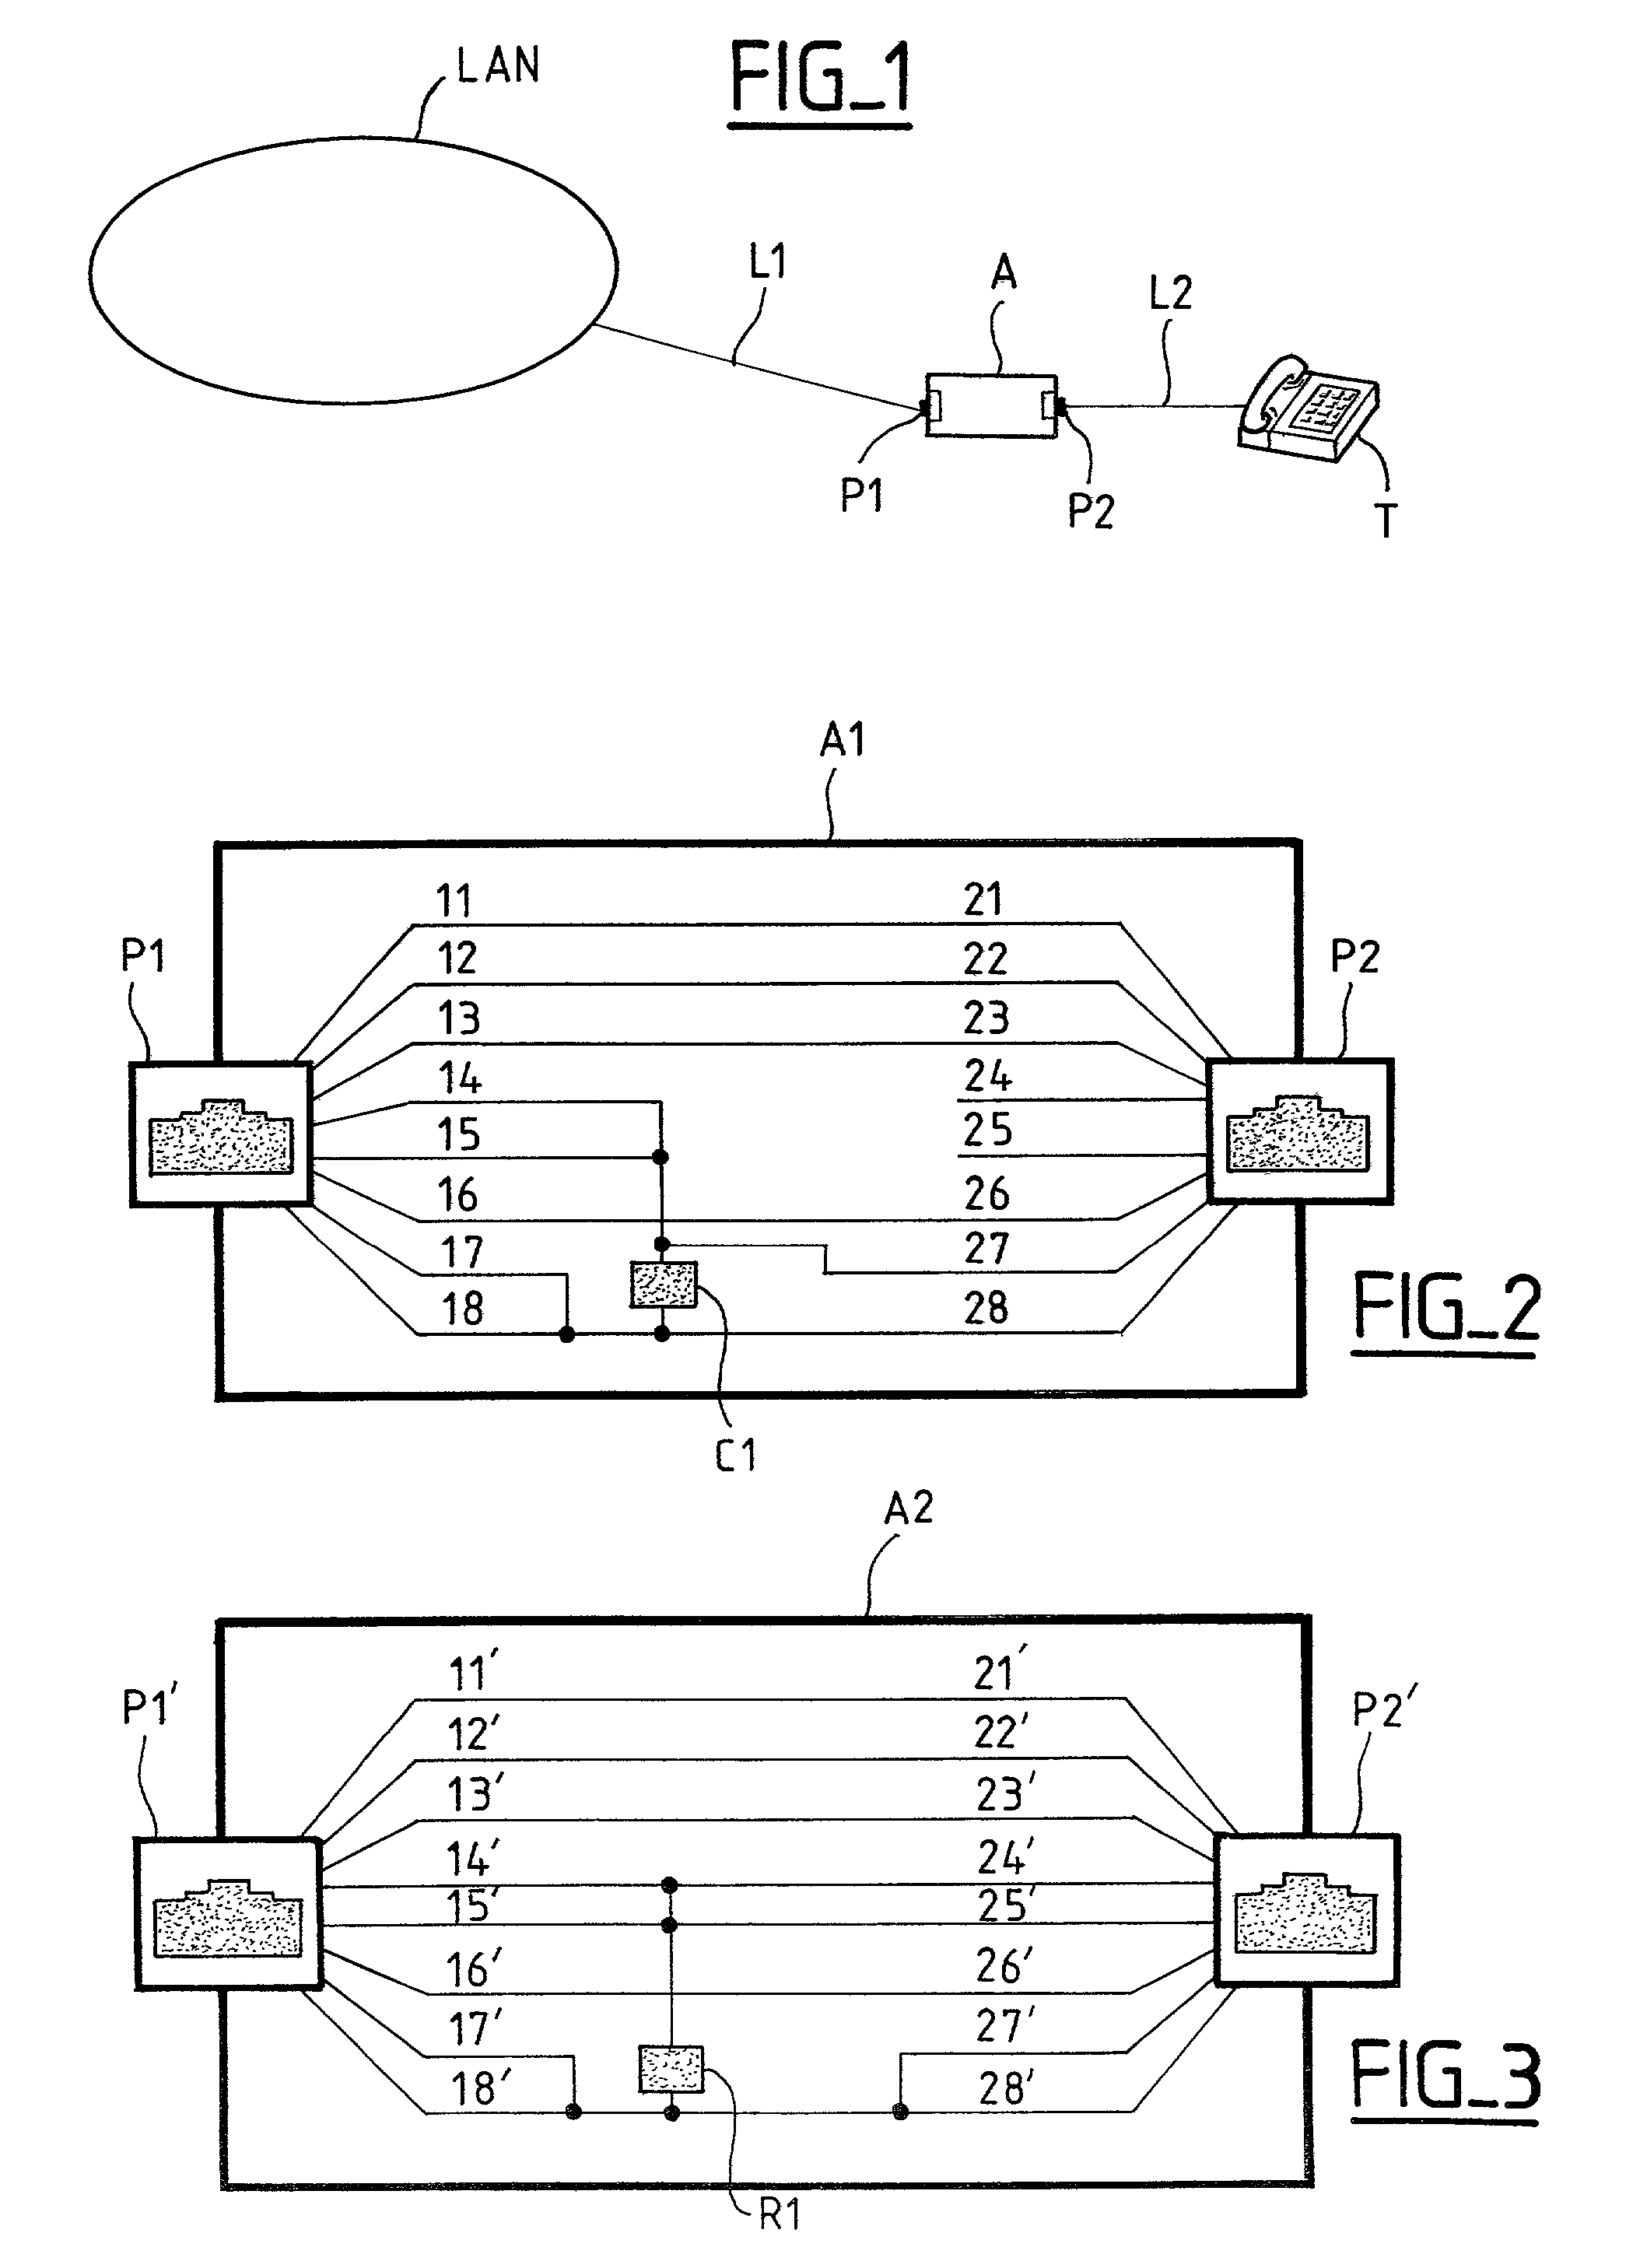 Terminal adapter for connecting a terminal to a computer local area network capable of identifying any of several terminal types